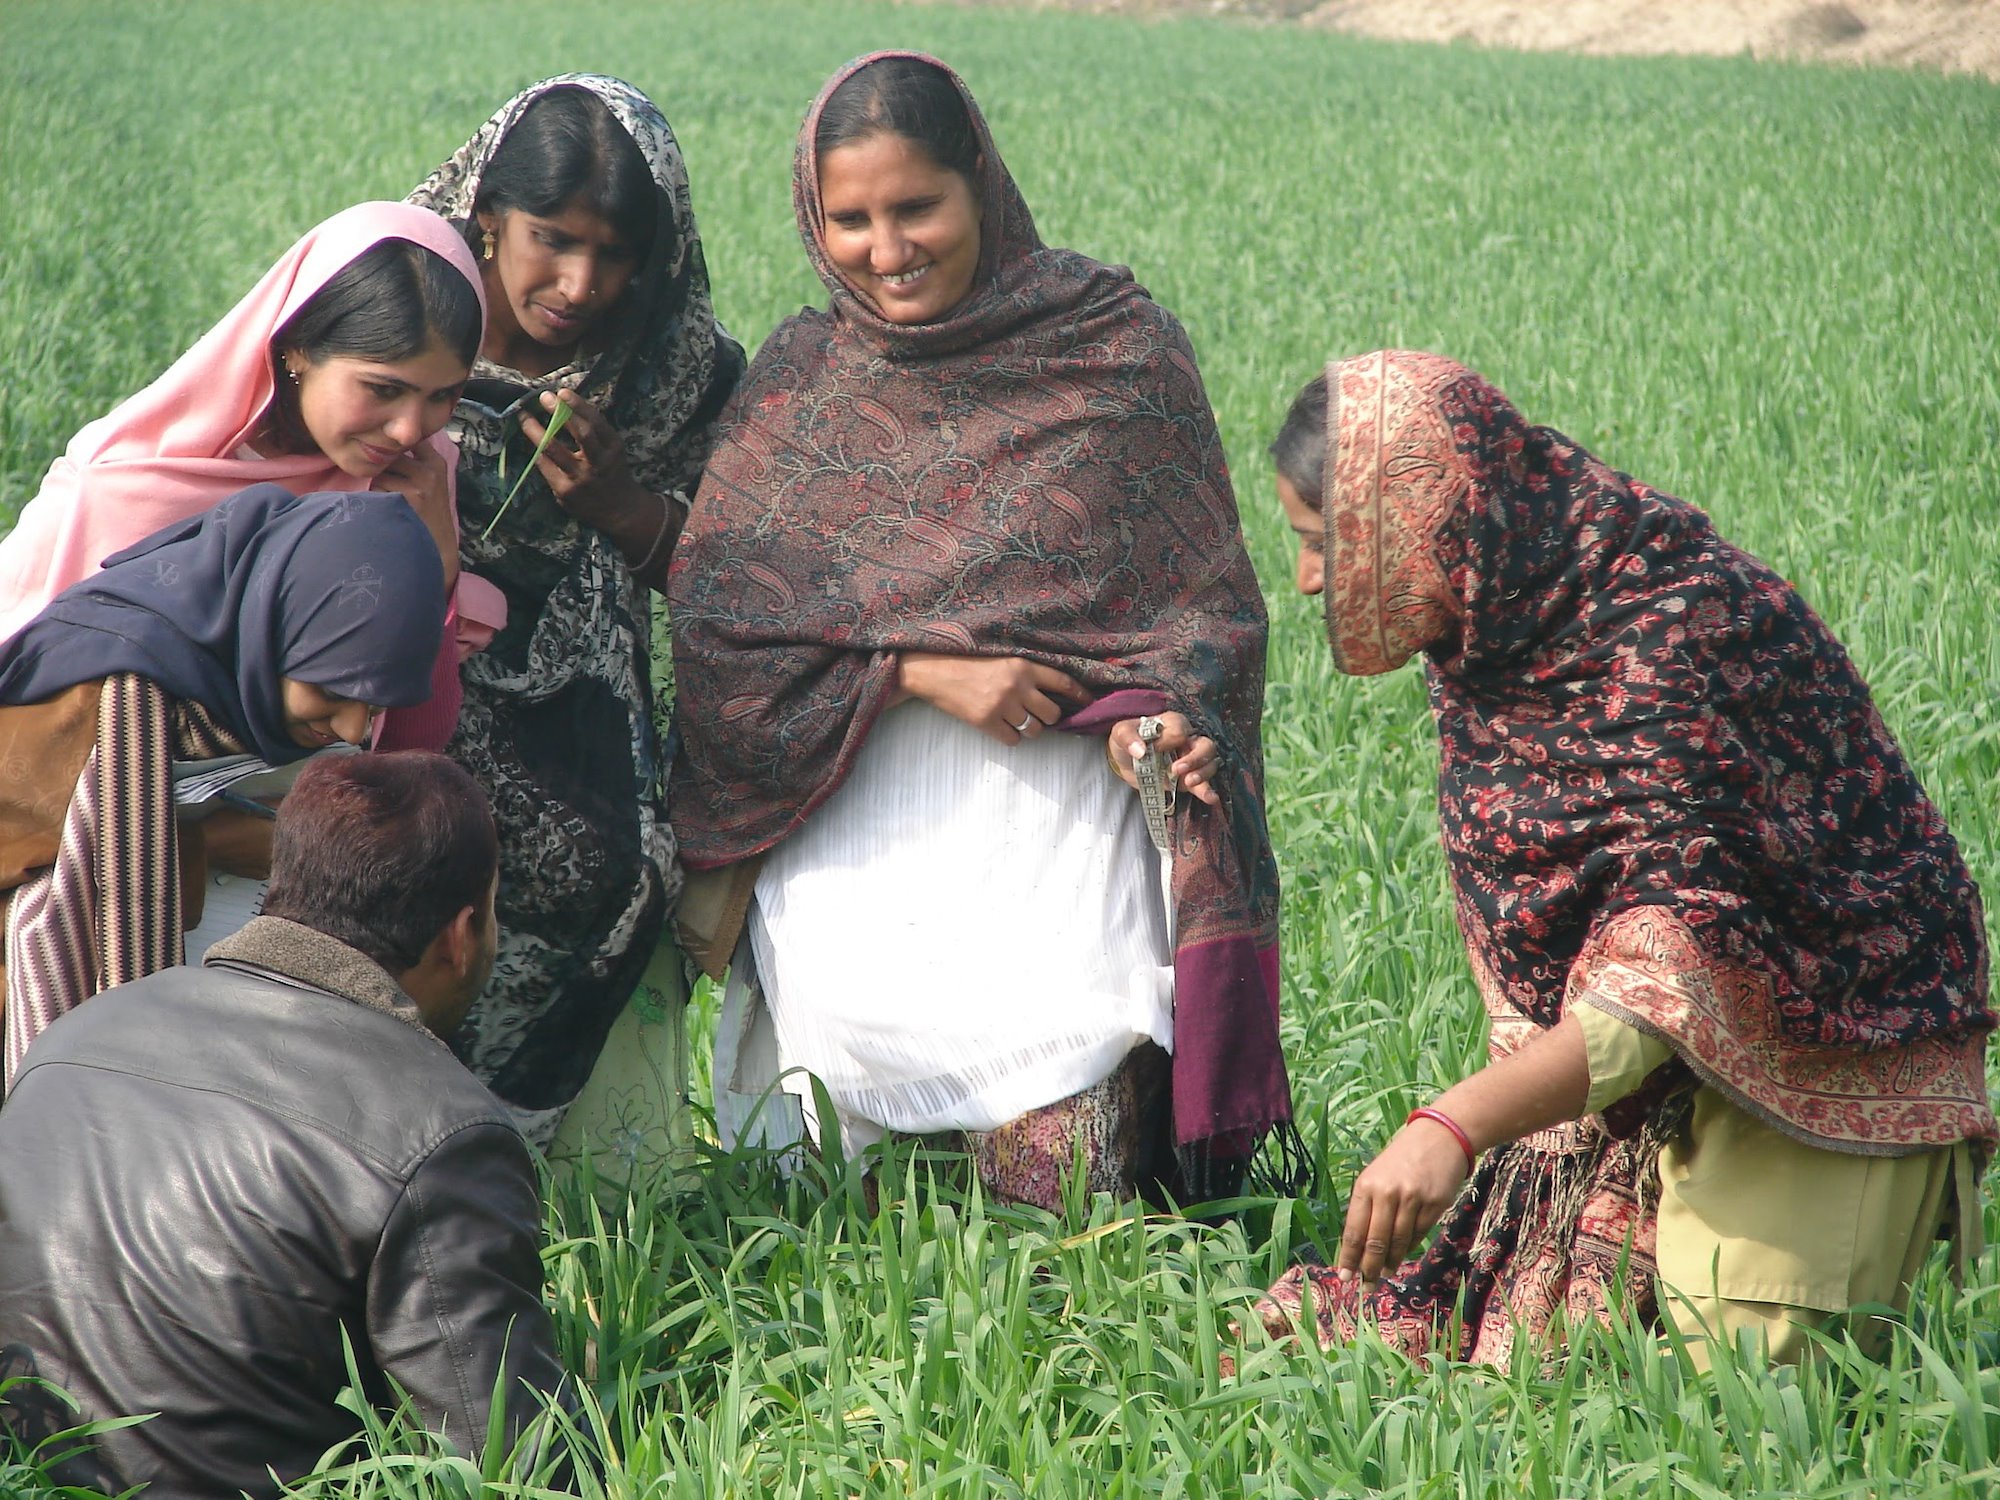 Four women in saris and a man standing in a field of crops